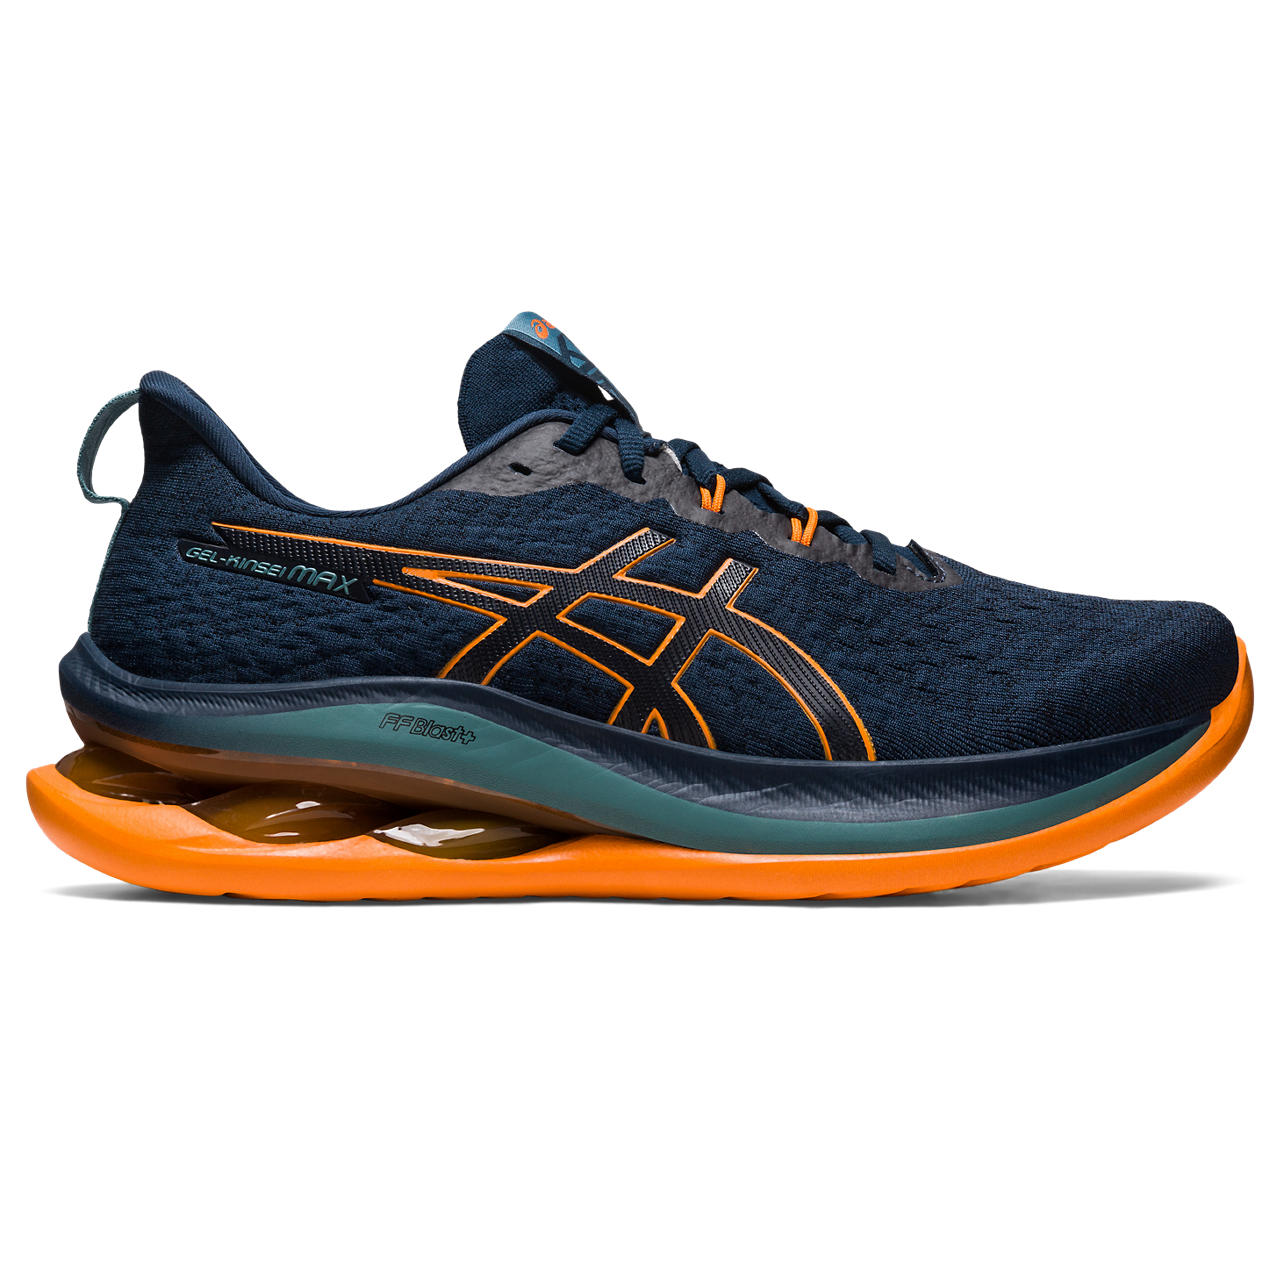 The Kinsei Max is a super comfortable running shoe that looks good and has a lot of cushion